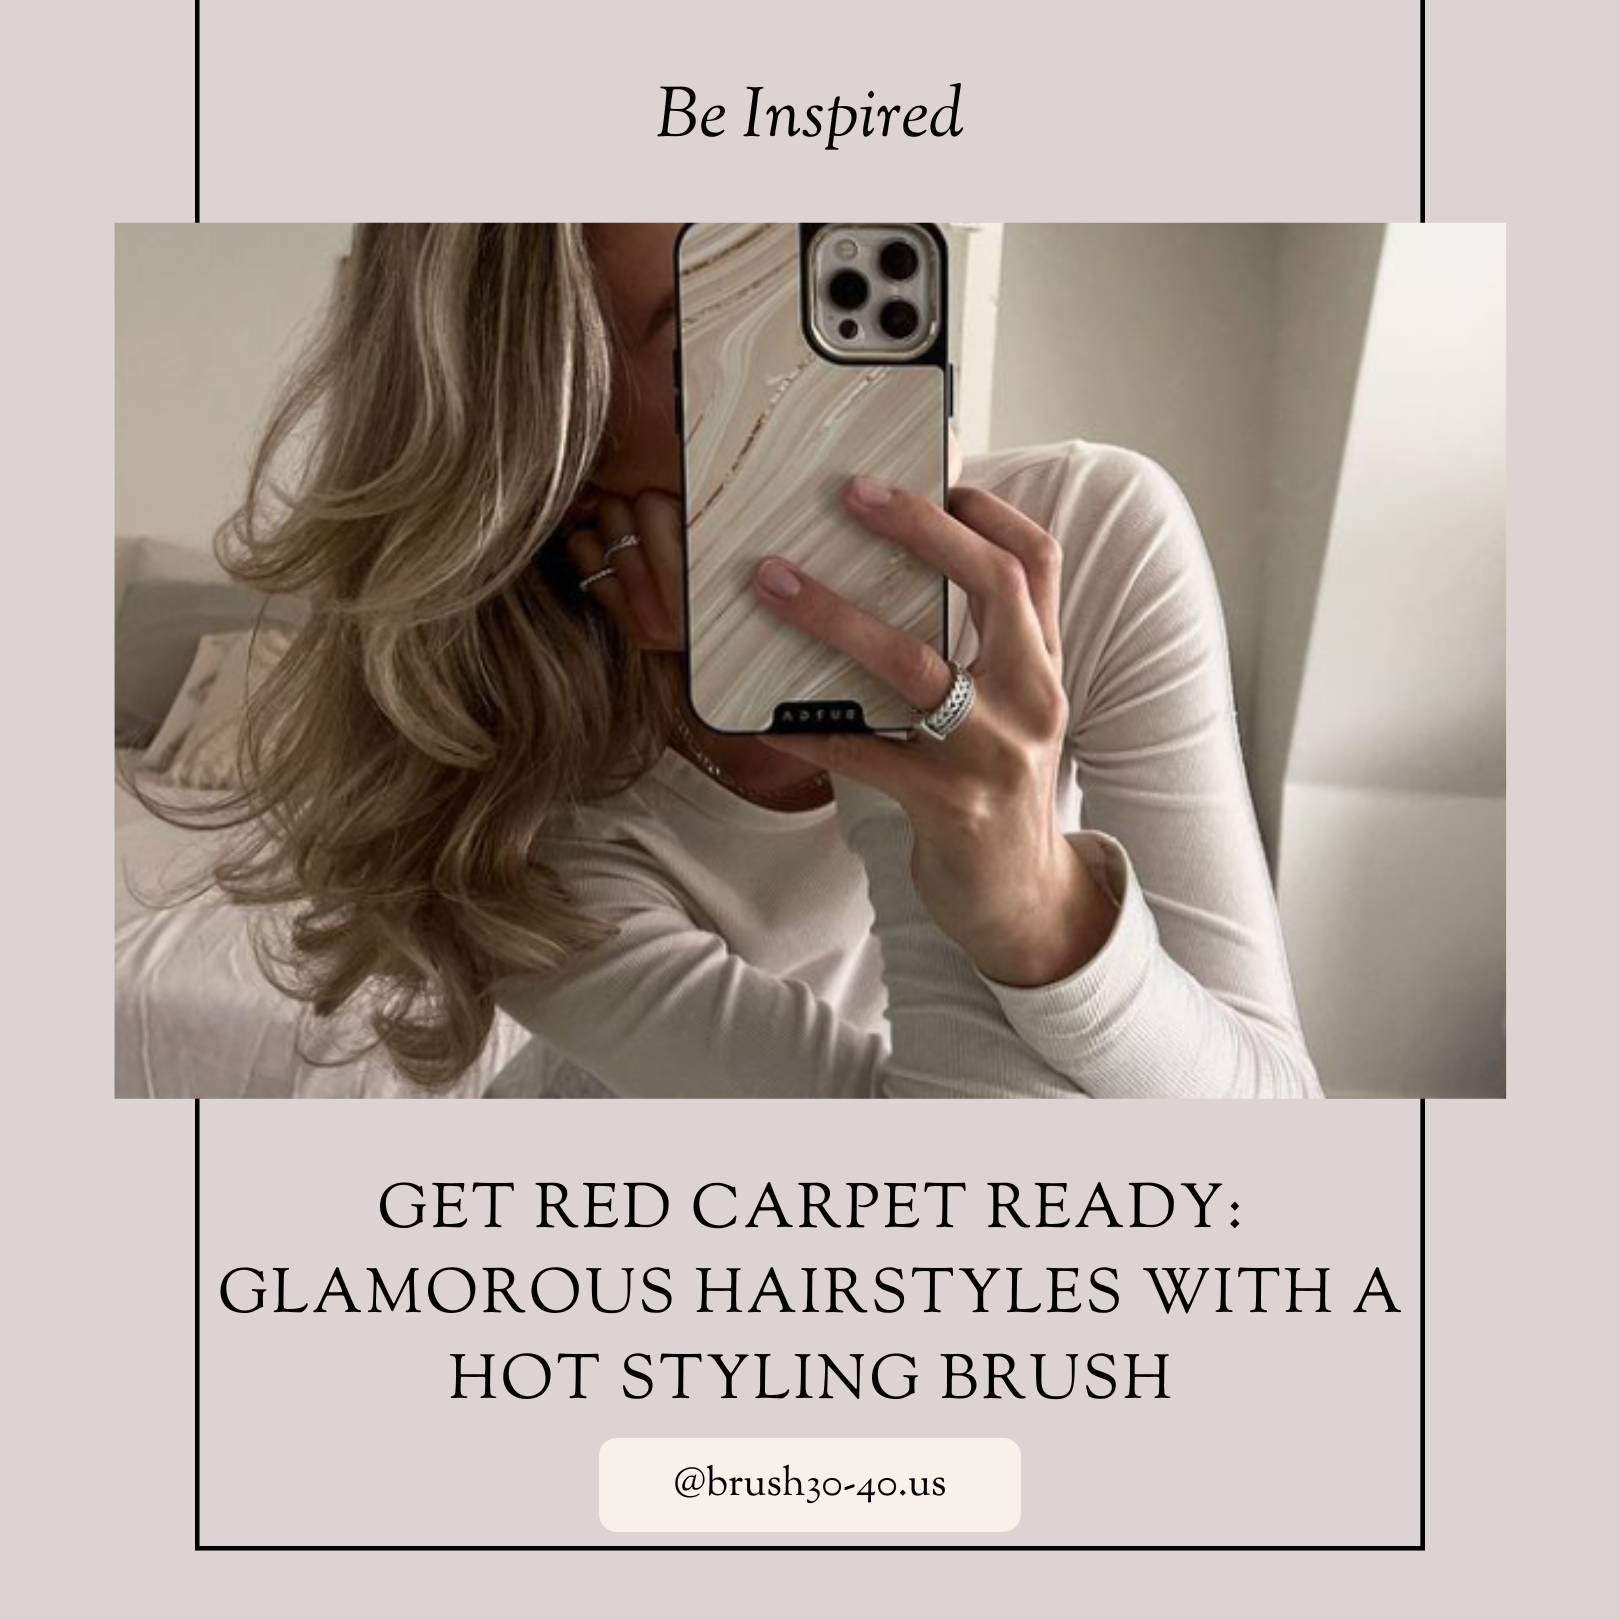 Get Red Carpet Ready: Glamorous Hairstyles with a Hot Styling Brush